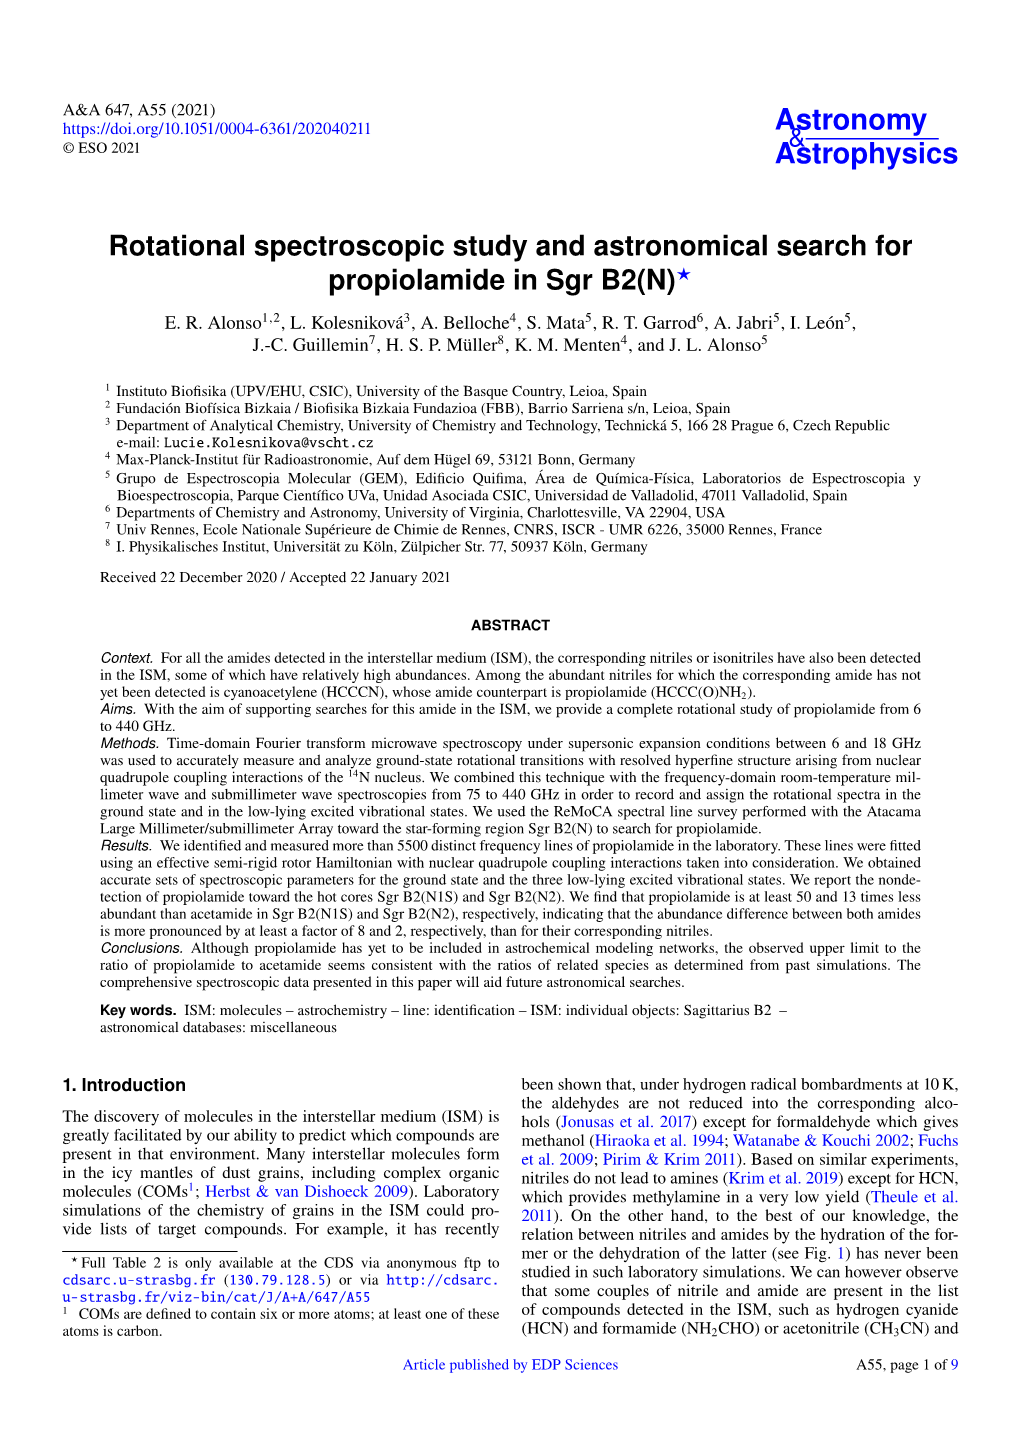 Rotational Spectroscopic Study and Astronomical Search for Propiolamide in Sgr B2(N)? E